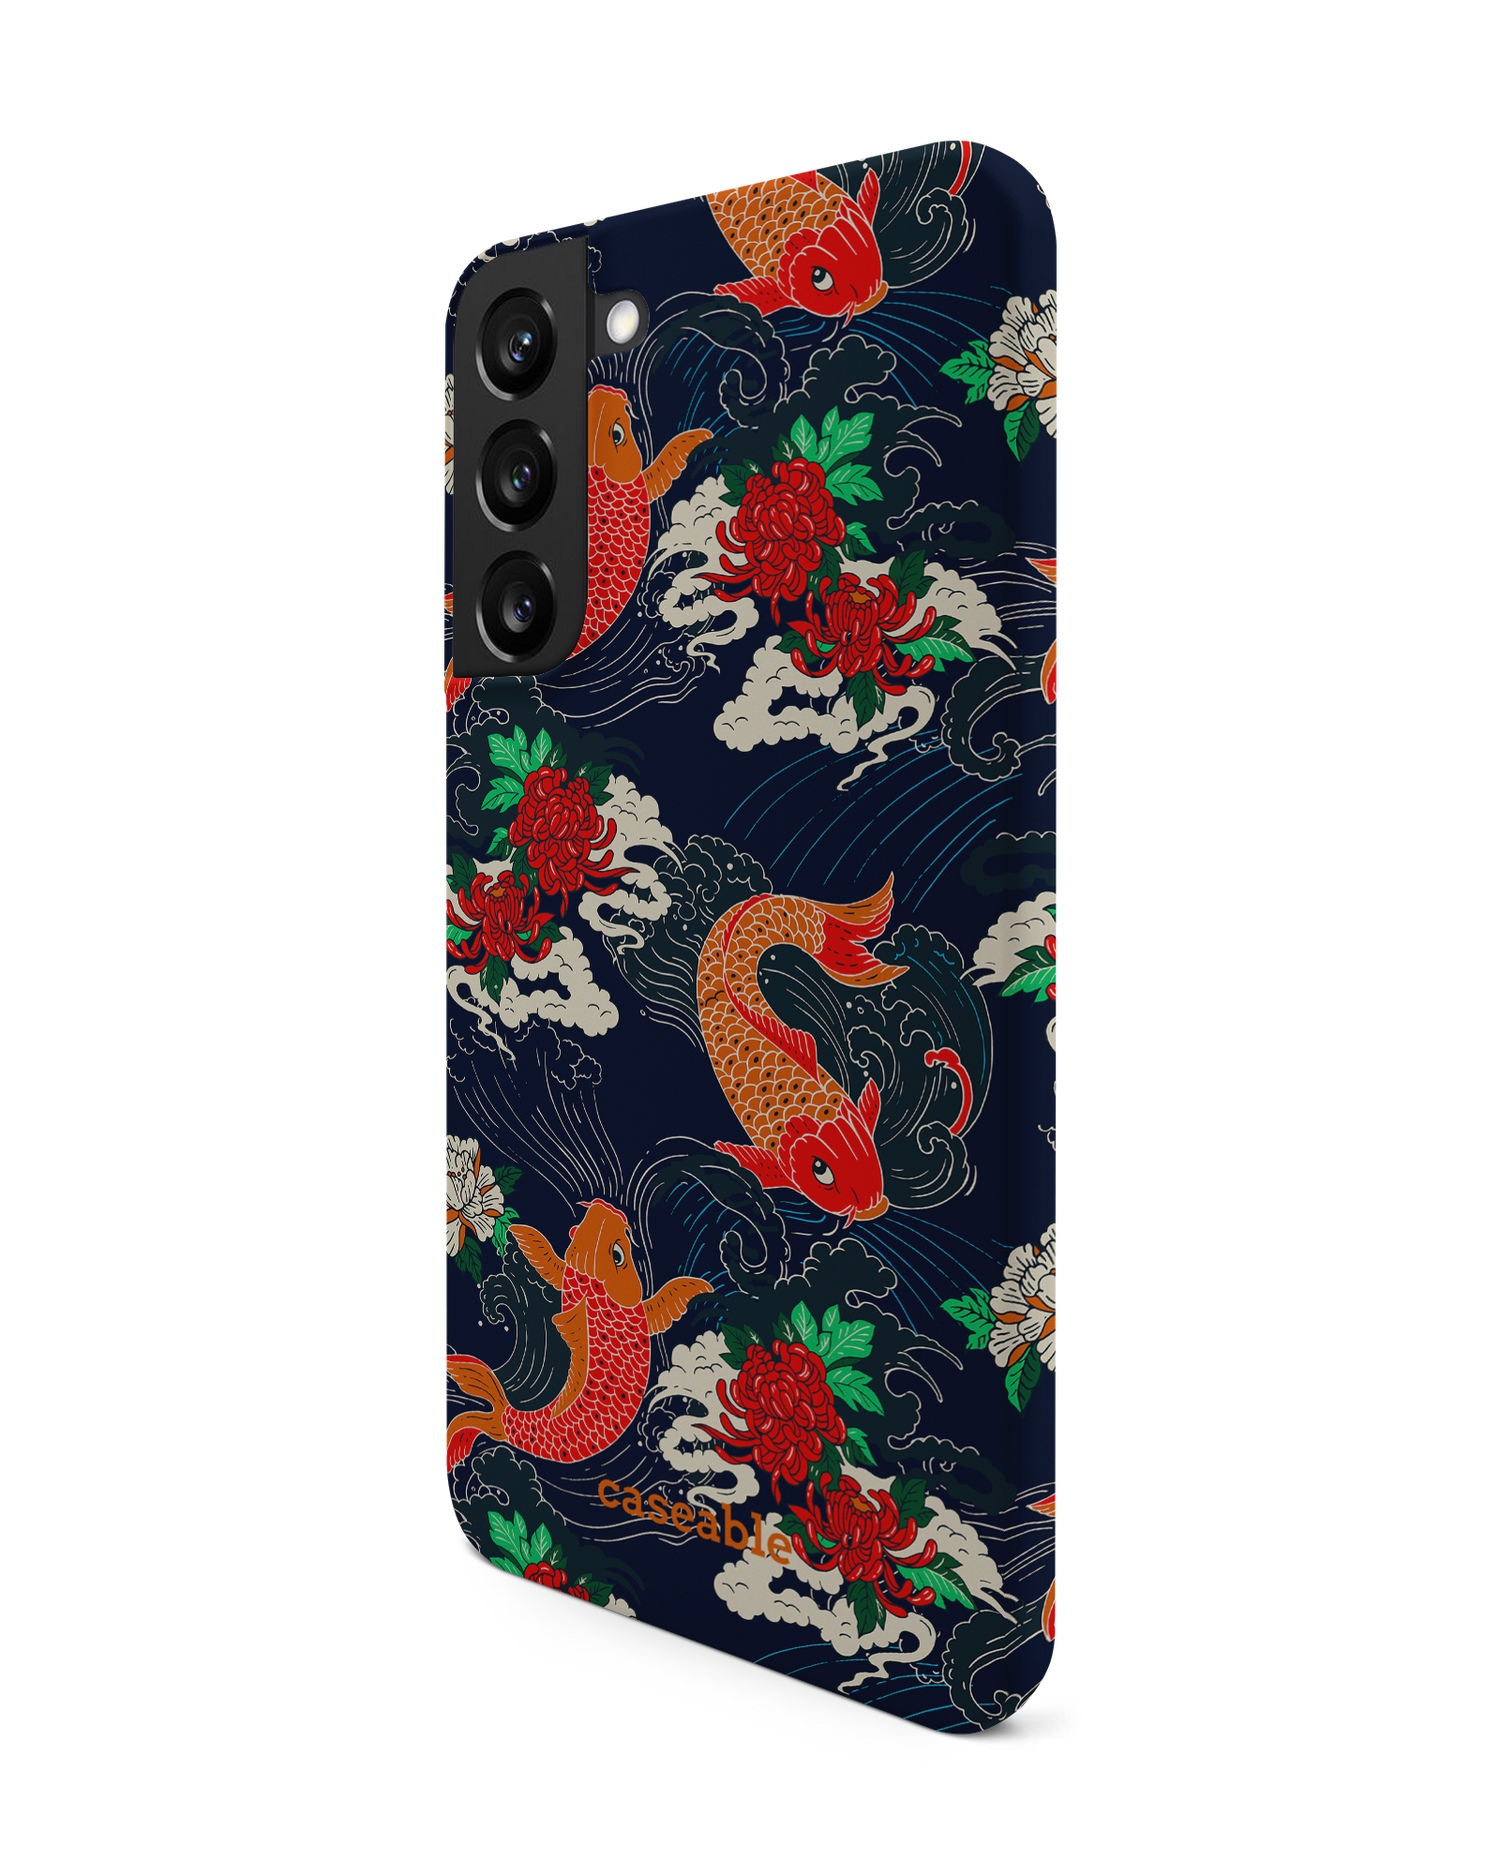 Repeating Koi Hard Shell Phone Case Samsung Galaxy S22 Plus 5G: View from the right side